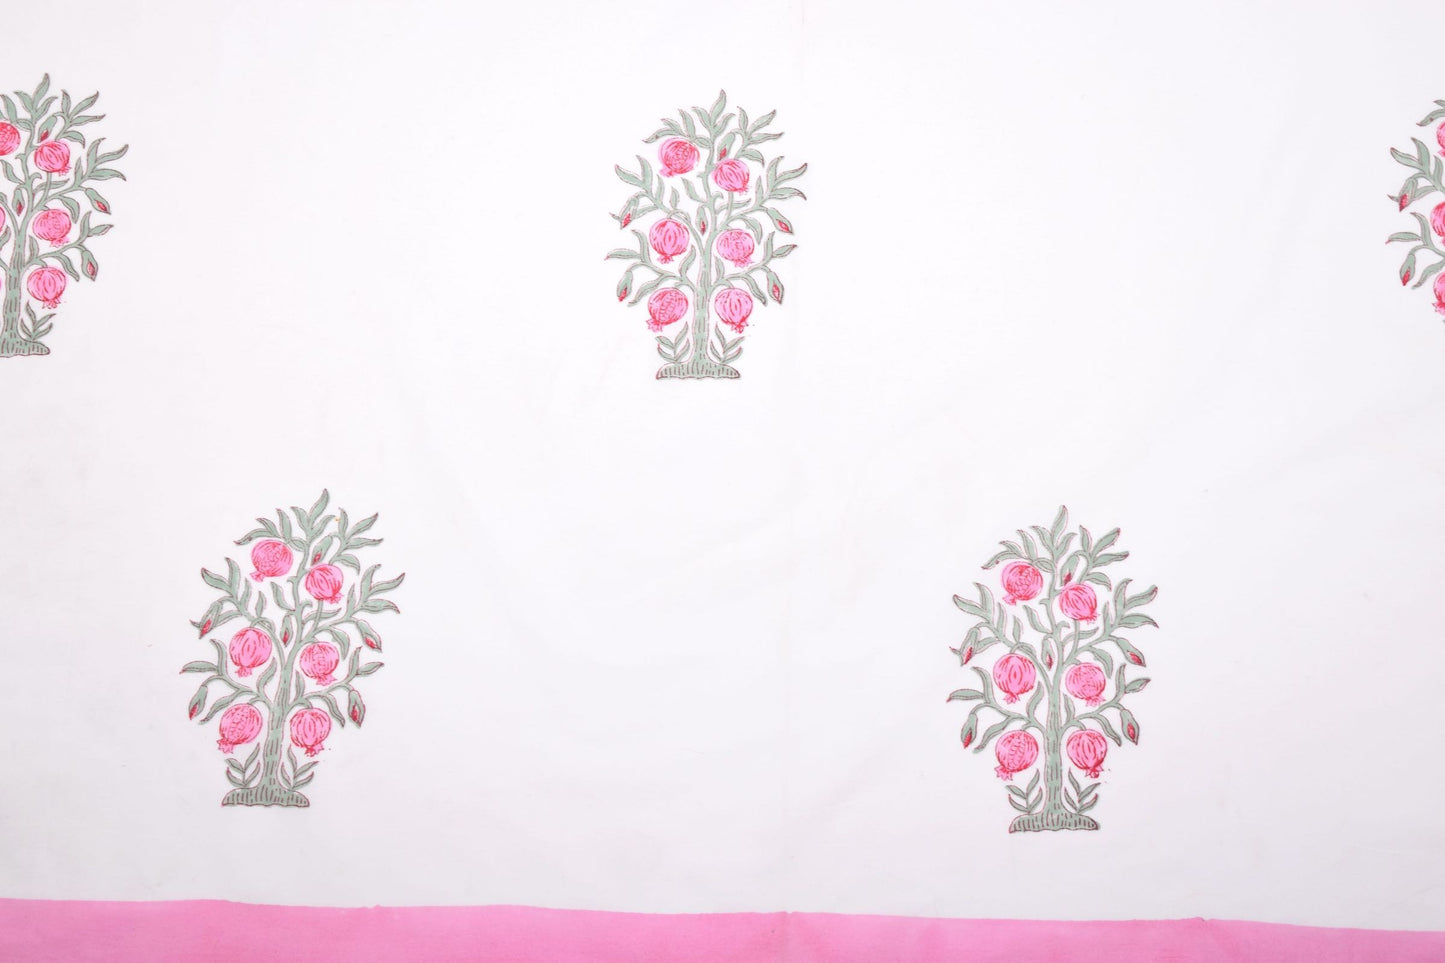 Cotton tablecloth TC5 with block printed pomegranate trees